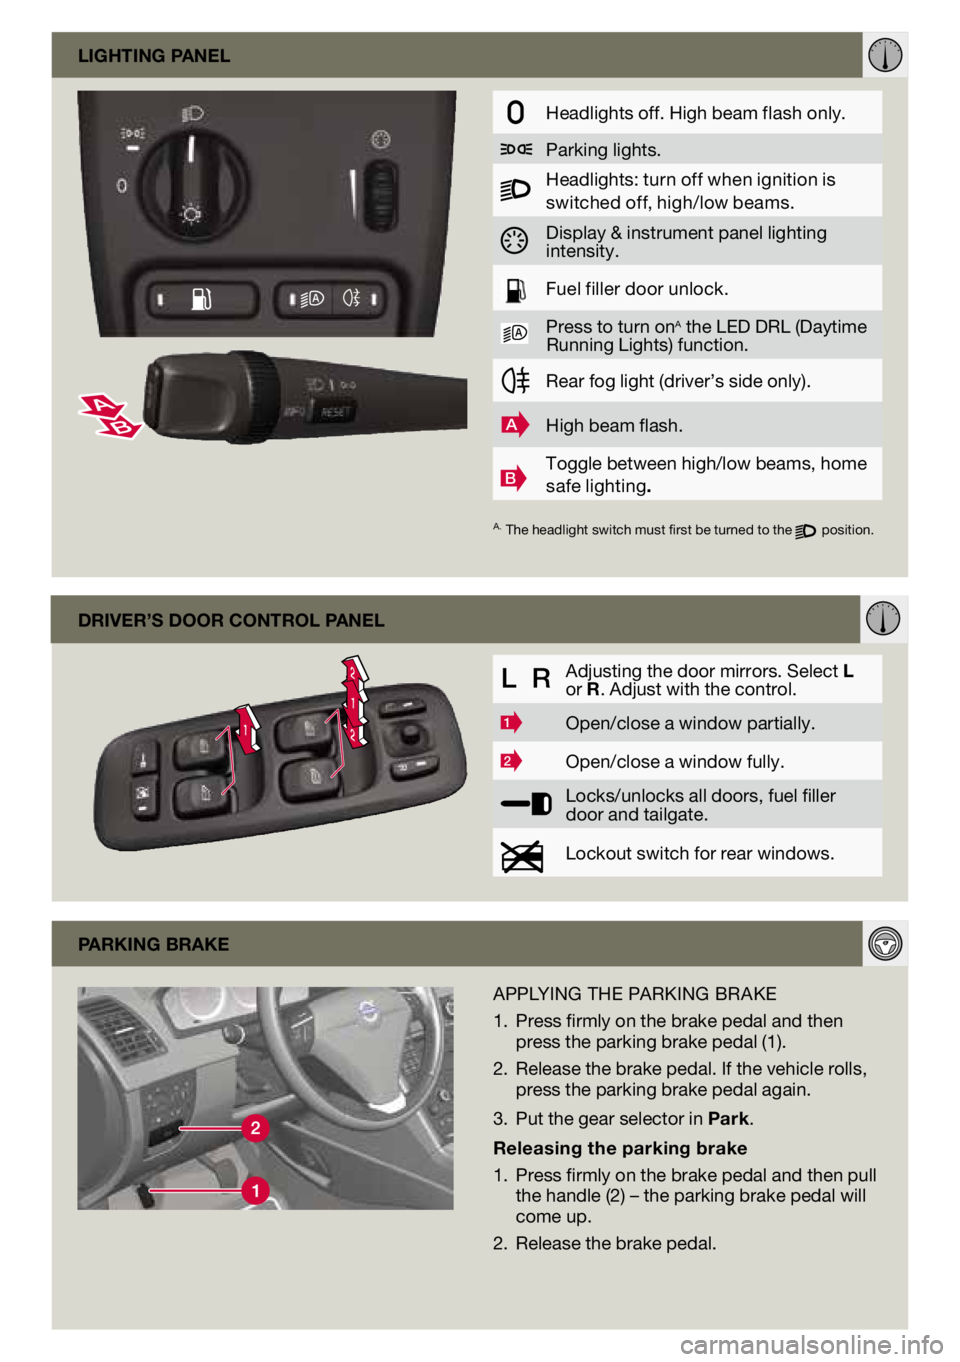 VOLVO XC90 2014  Quick Guide 1
221
driver’s door control panel
L  RAdjusting the door mirrors. Select l 
or 
r. Adjust with the control.
1Open/close a window partially.
2Open/close a window fully.
Locks/unlocks all doors, fuel 